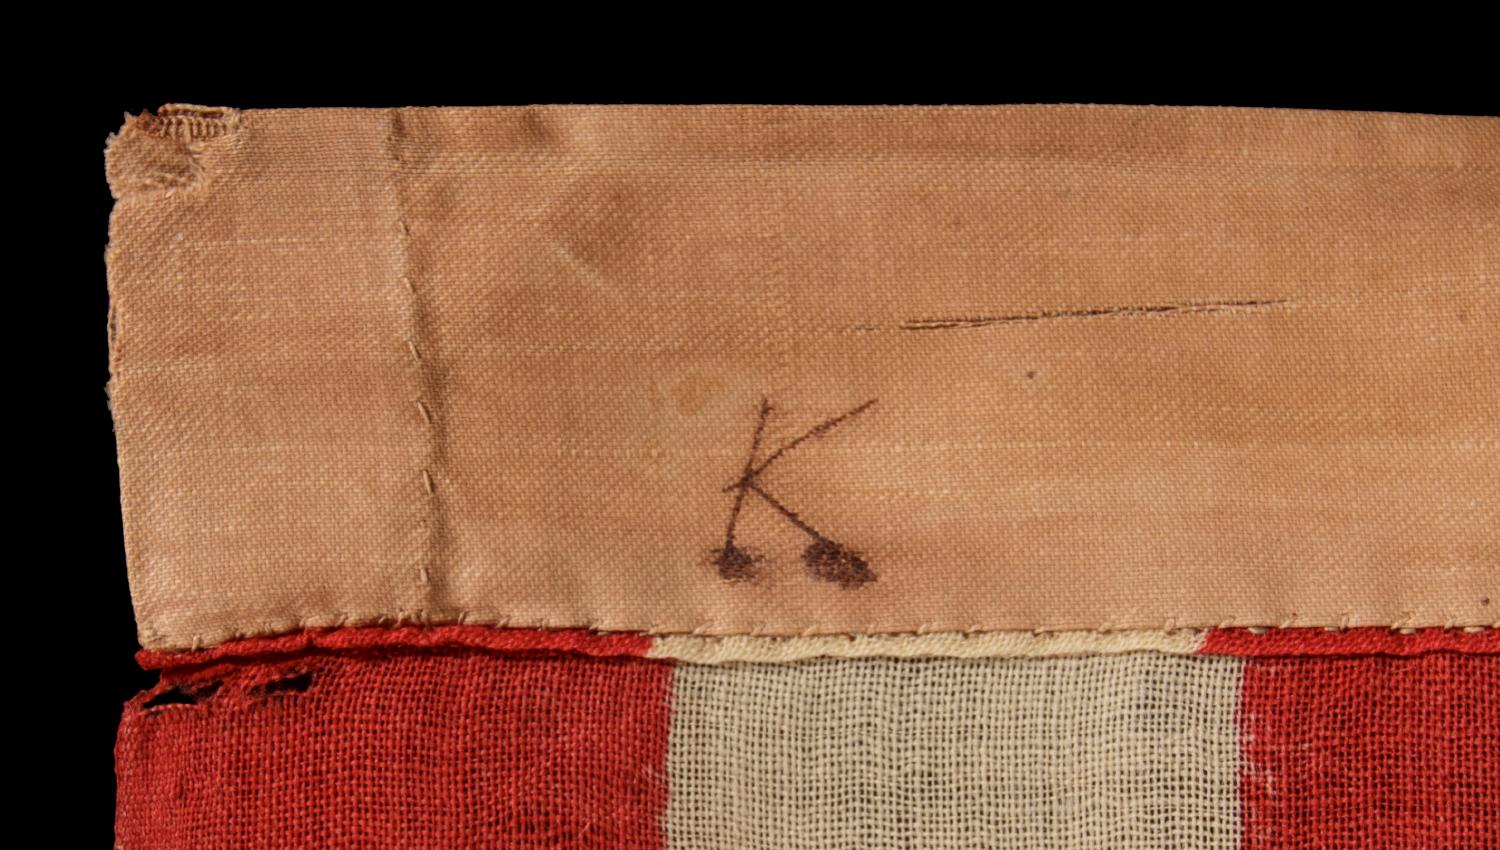 Late 19th Century 40 Canted Stars on an Antique American Flag, South Dakota Statehood, 1889